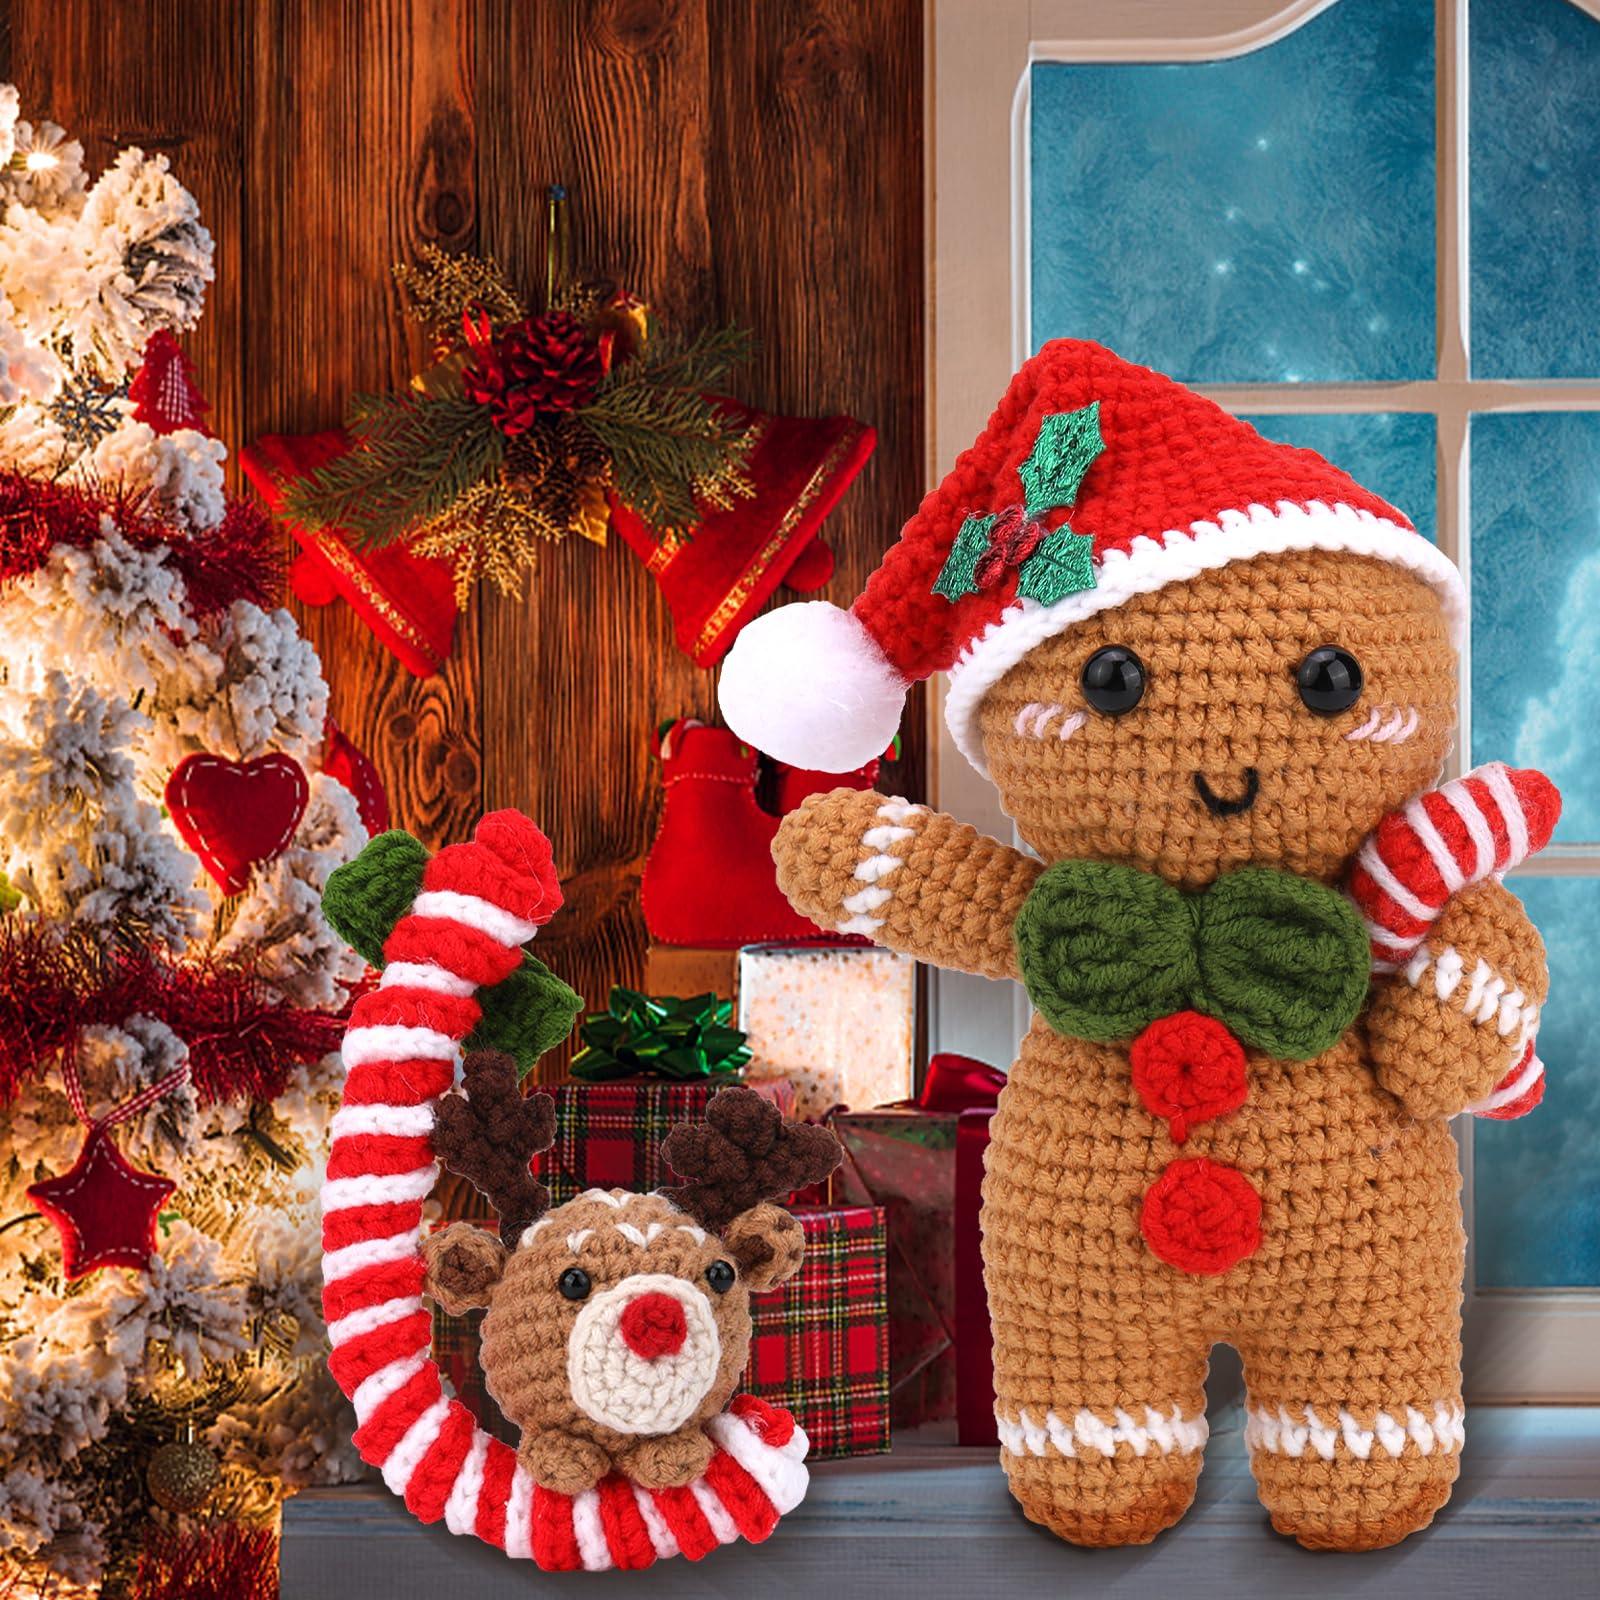 Qiuxunies Crochet Kit for Beginners, Christmas Gingerbread Man Crochet Set  DIY Gift for Starters Adult Kids Instruction and Video Tutorials (40%+